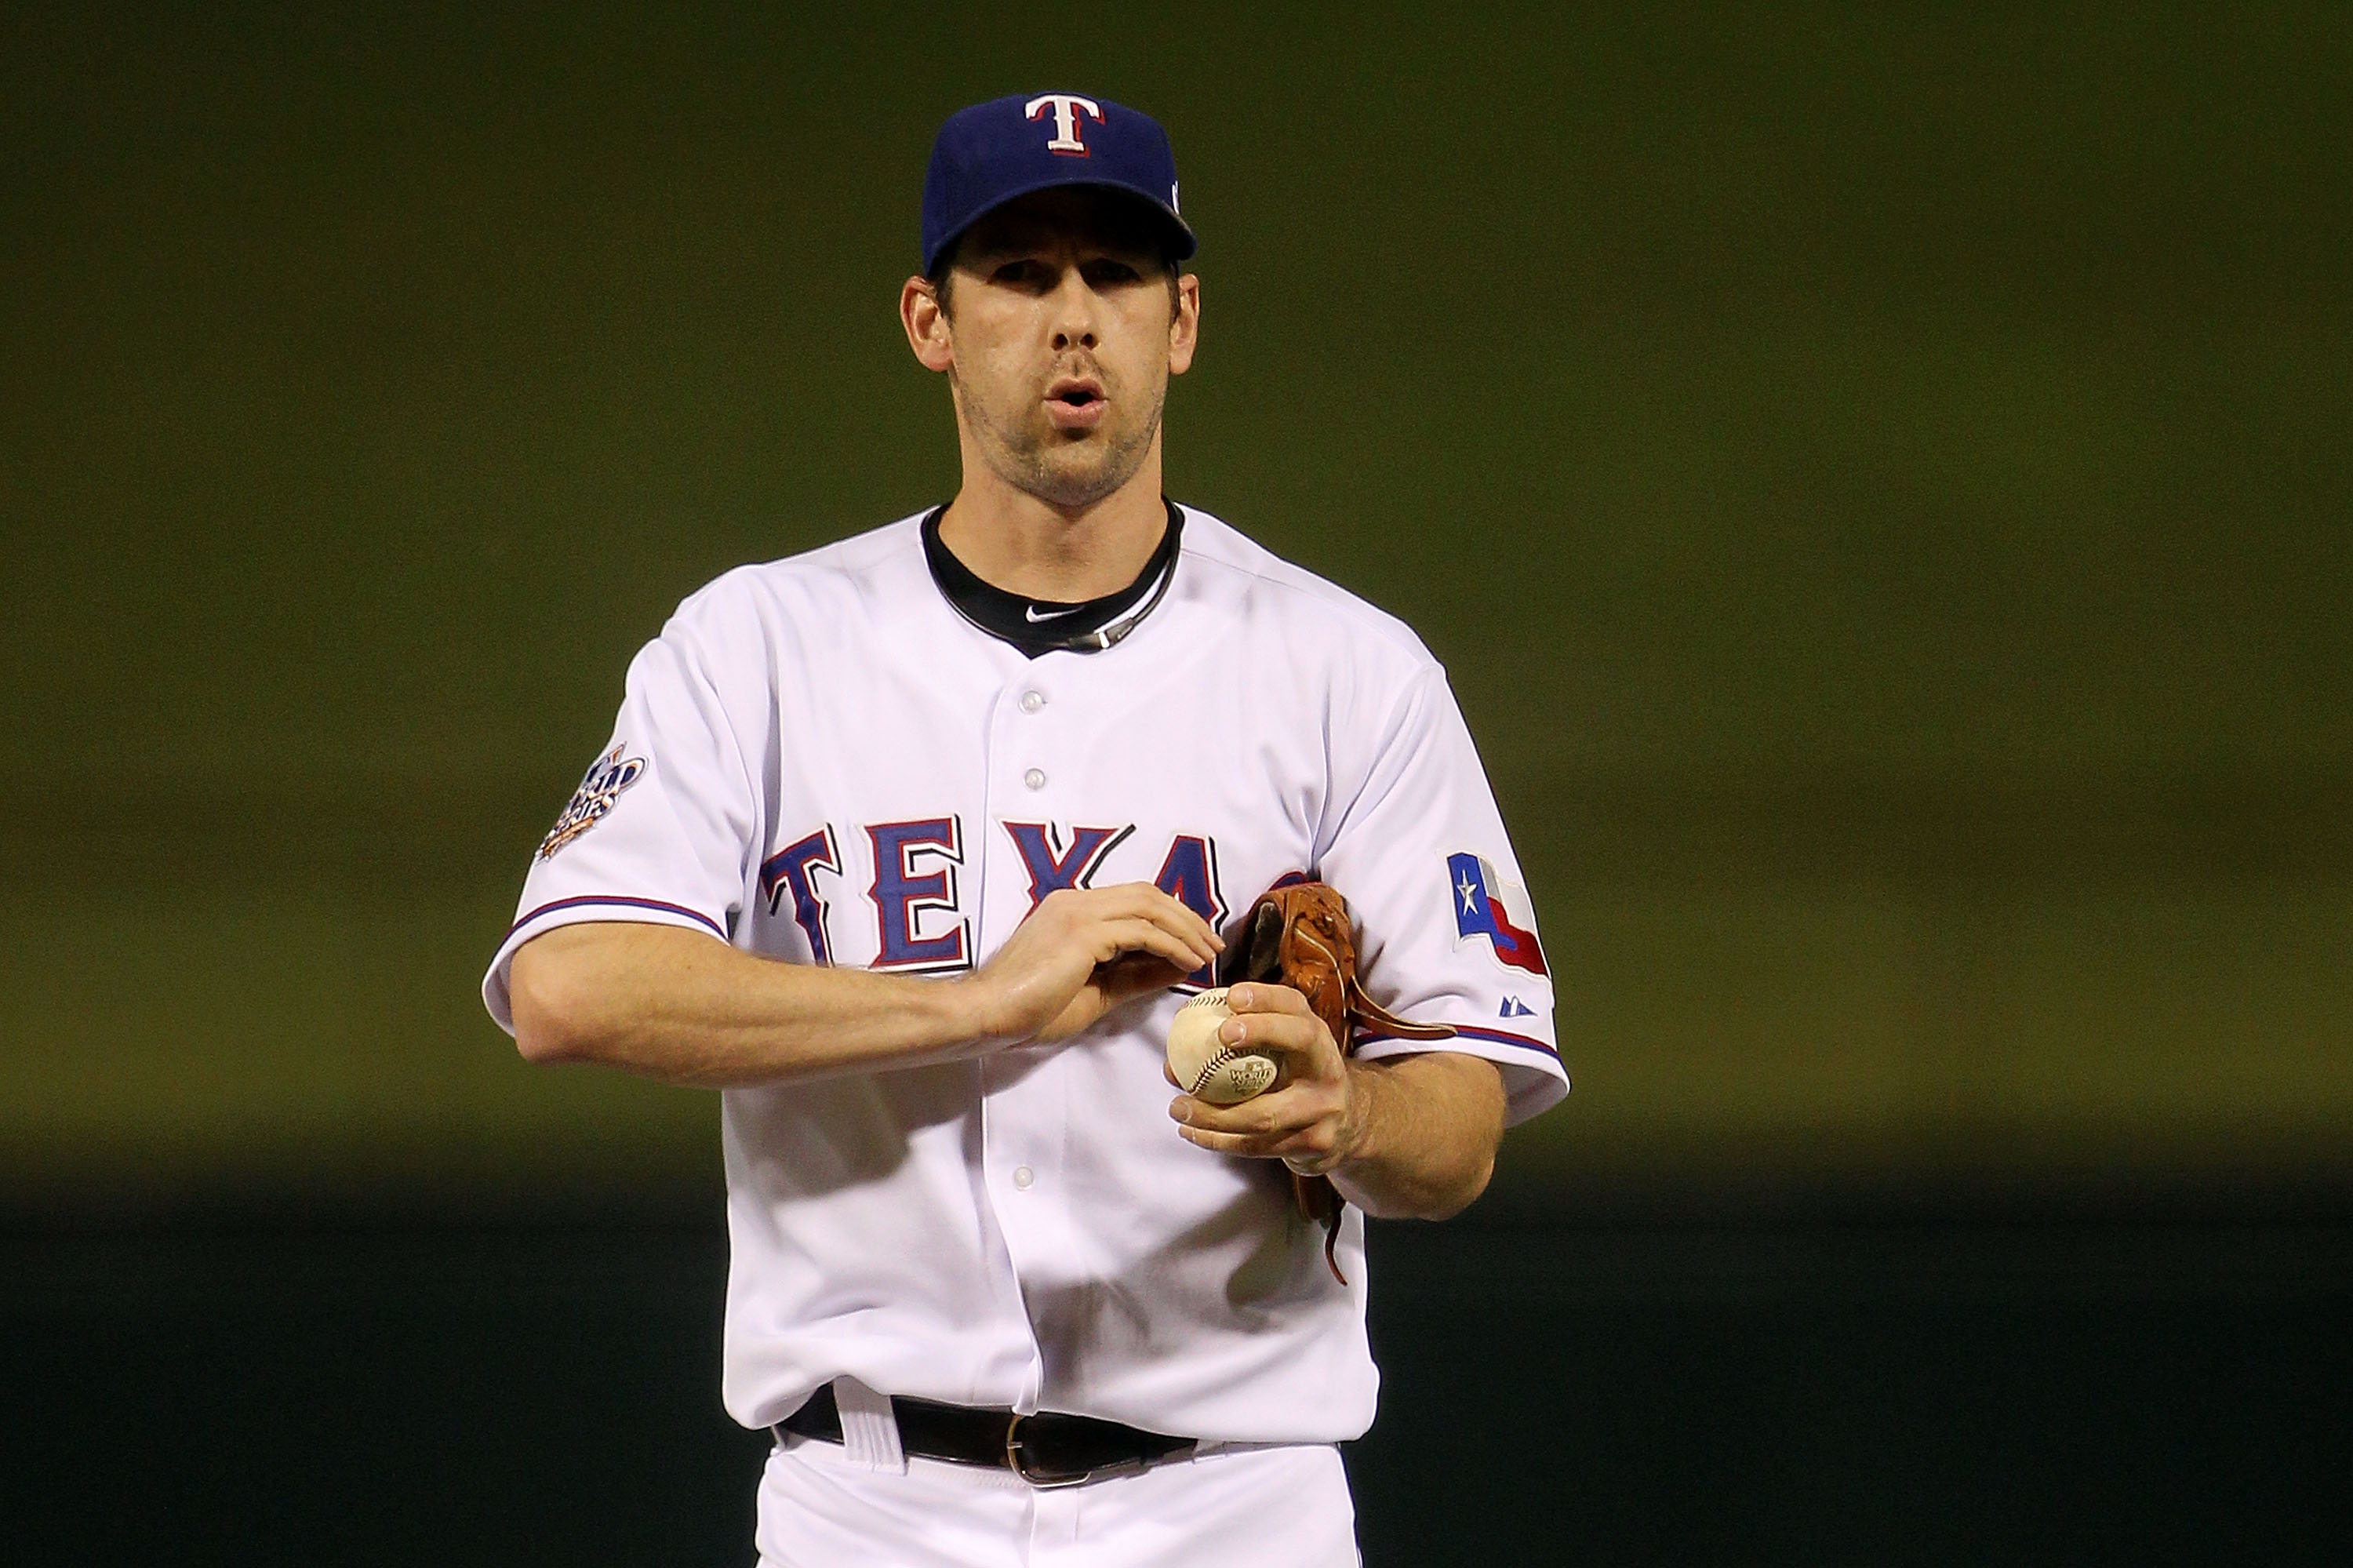 ARLINGTON, TX - NOVEMBER 01:  Cliff Lee #33 of the Texas Rangers pitches gets set to throw a pitch against the San Francisco Giants in Game Five of the 2010 MLB World Series at Rangers Ballpark in Arlington on November 1, 2010 in Arlington, Texas.  (Photo